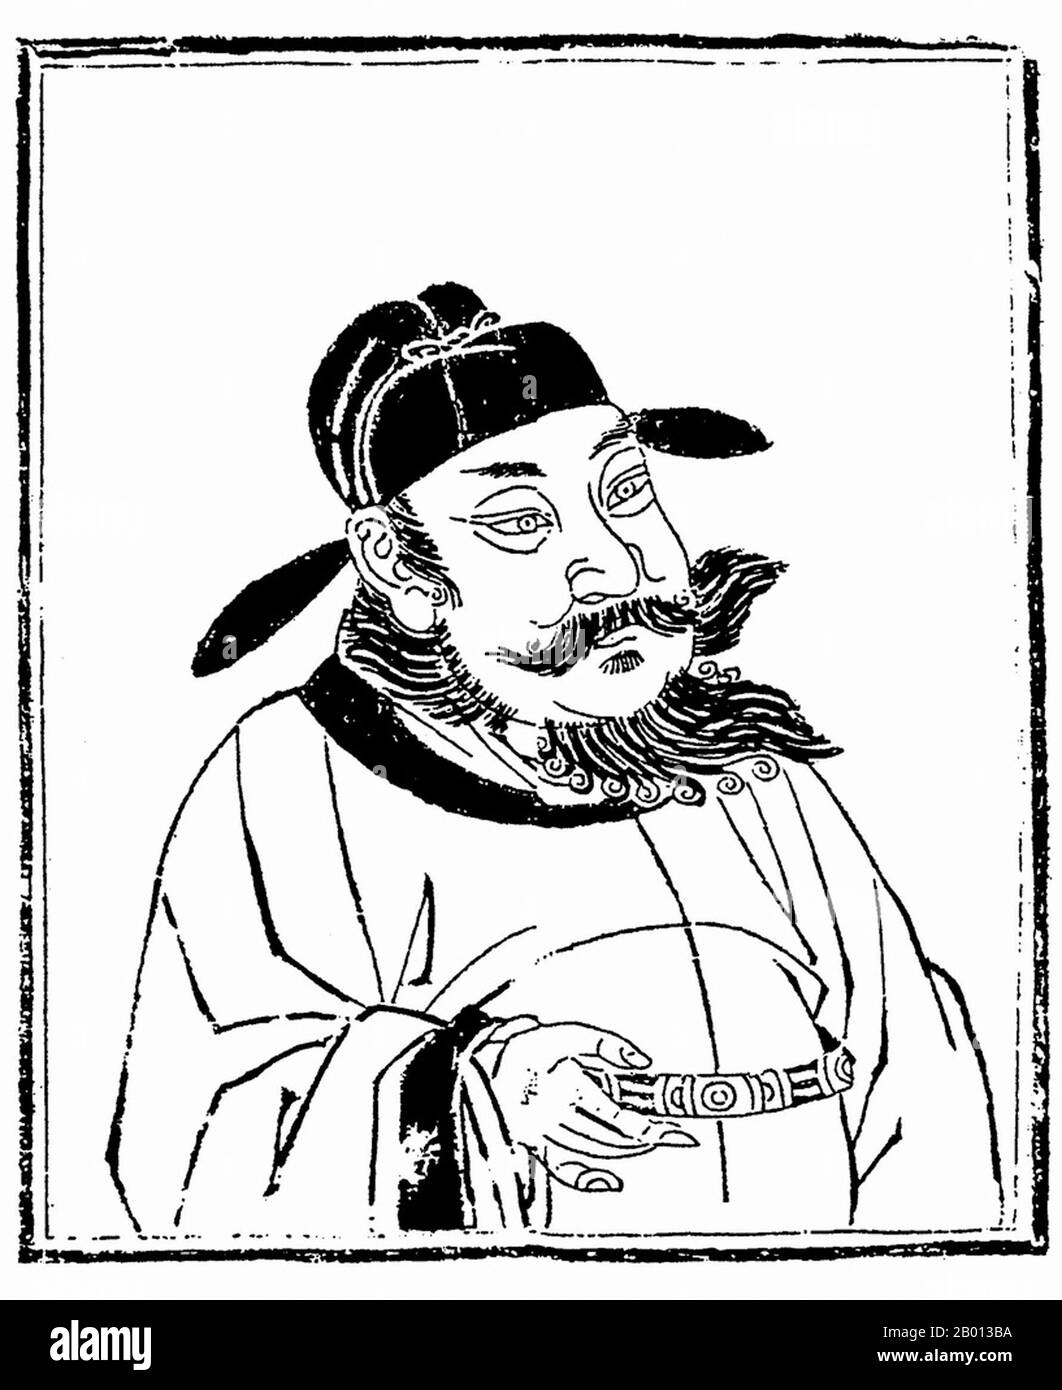 China: Emperor Taizong (Tang Lishimin, January 23, 599 – July 10, 649), 2nd ruler of the Tang Dynasty (r. 626-649). Illustration, c. 19th century.  Emperor Taizong of Tang, personal name Li Shimin, was the second emperor of the Tang Dynasty of China, ruling from 626 to 649. He is ceremonially regarded as a co-founder of the dynasty along with Emperor Gaozu. He is typically considered one of the greatest, if not the greatest, emperors in Chinese history. Throughout the rest of Chinese history, his reign was regarded as the exemplary model against which all other emperors were measured. Stock Photo